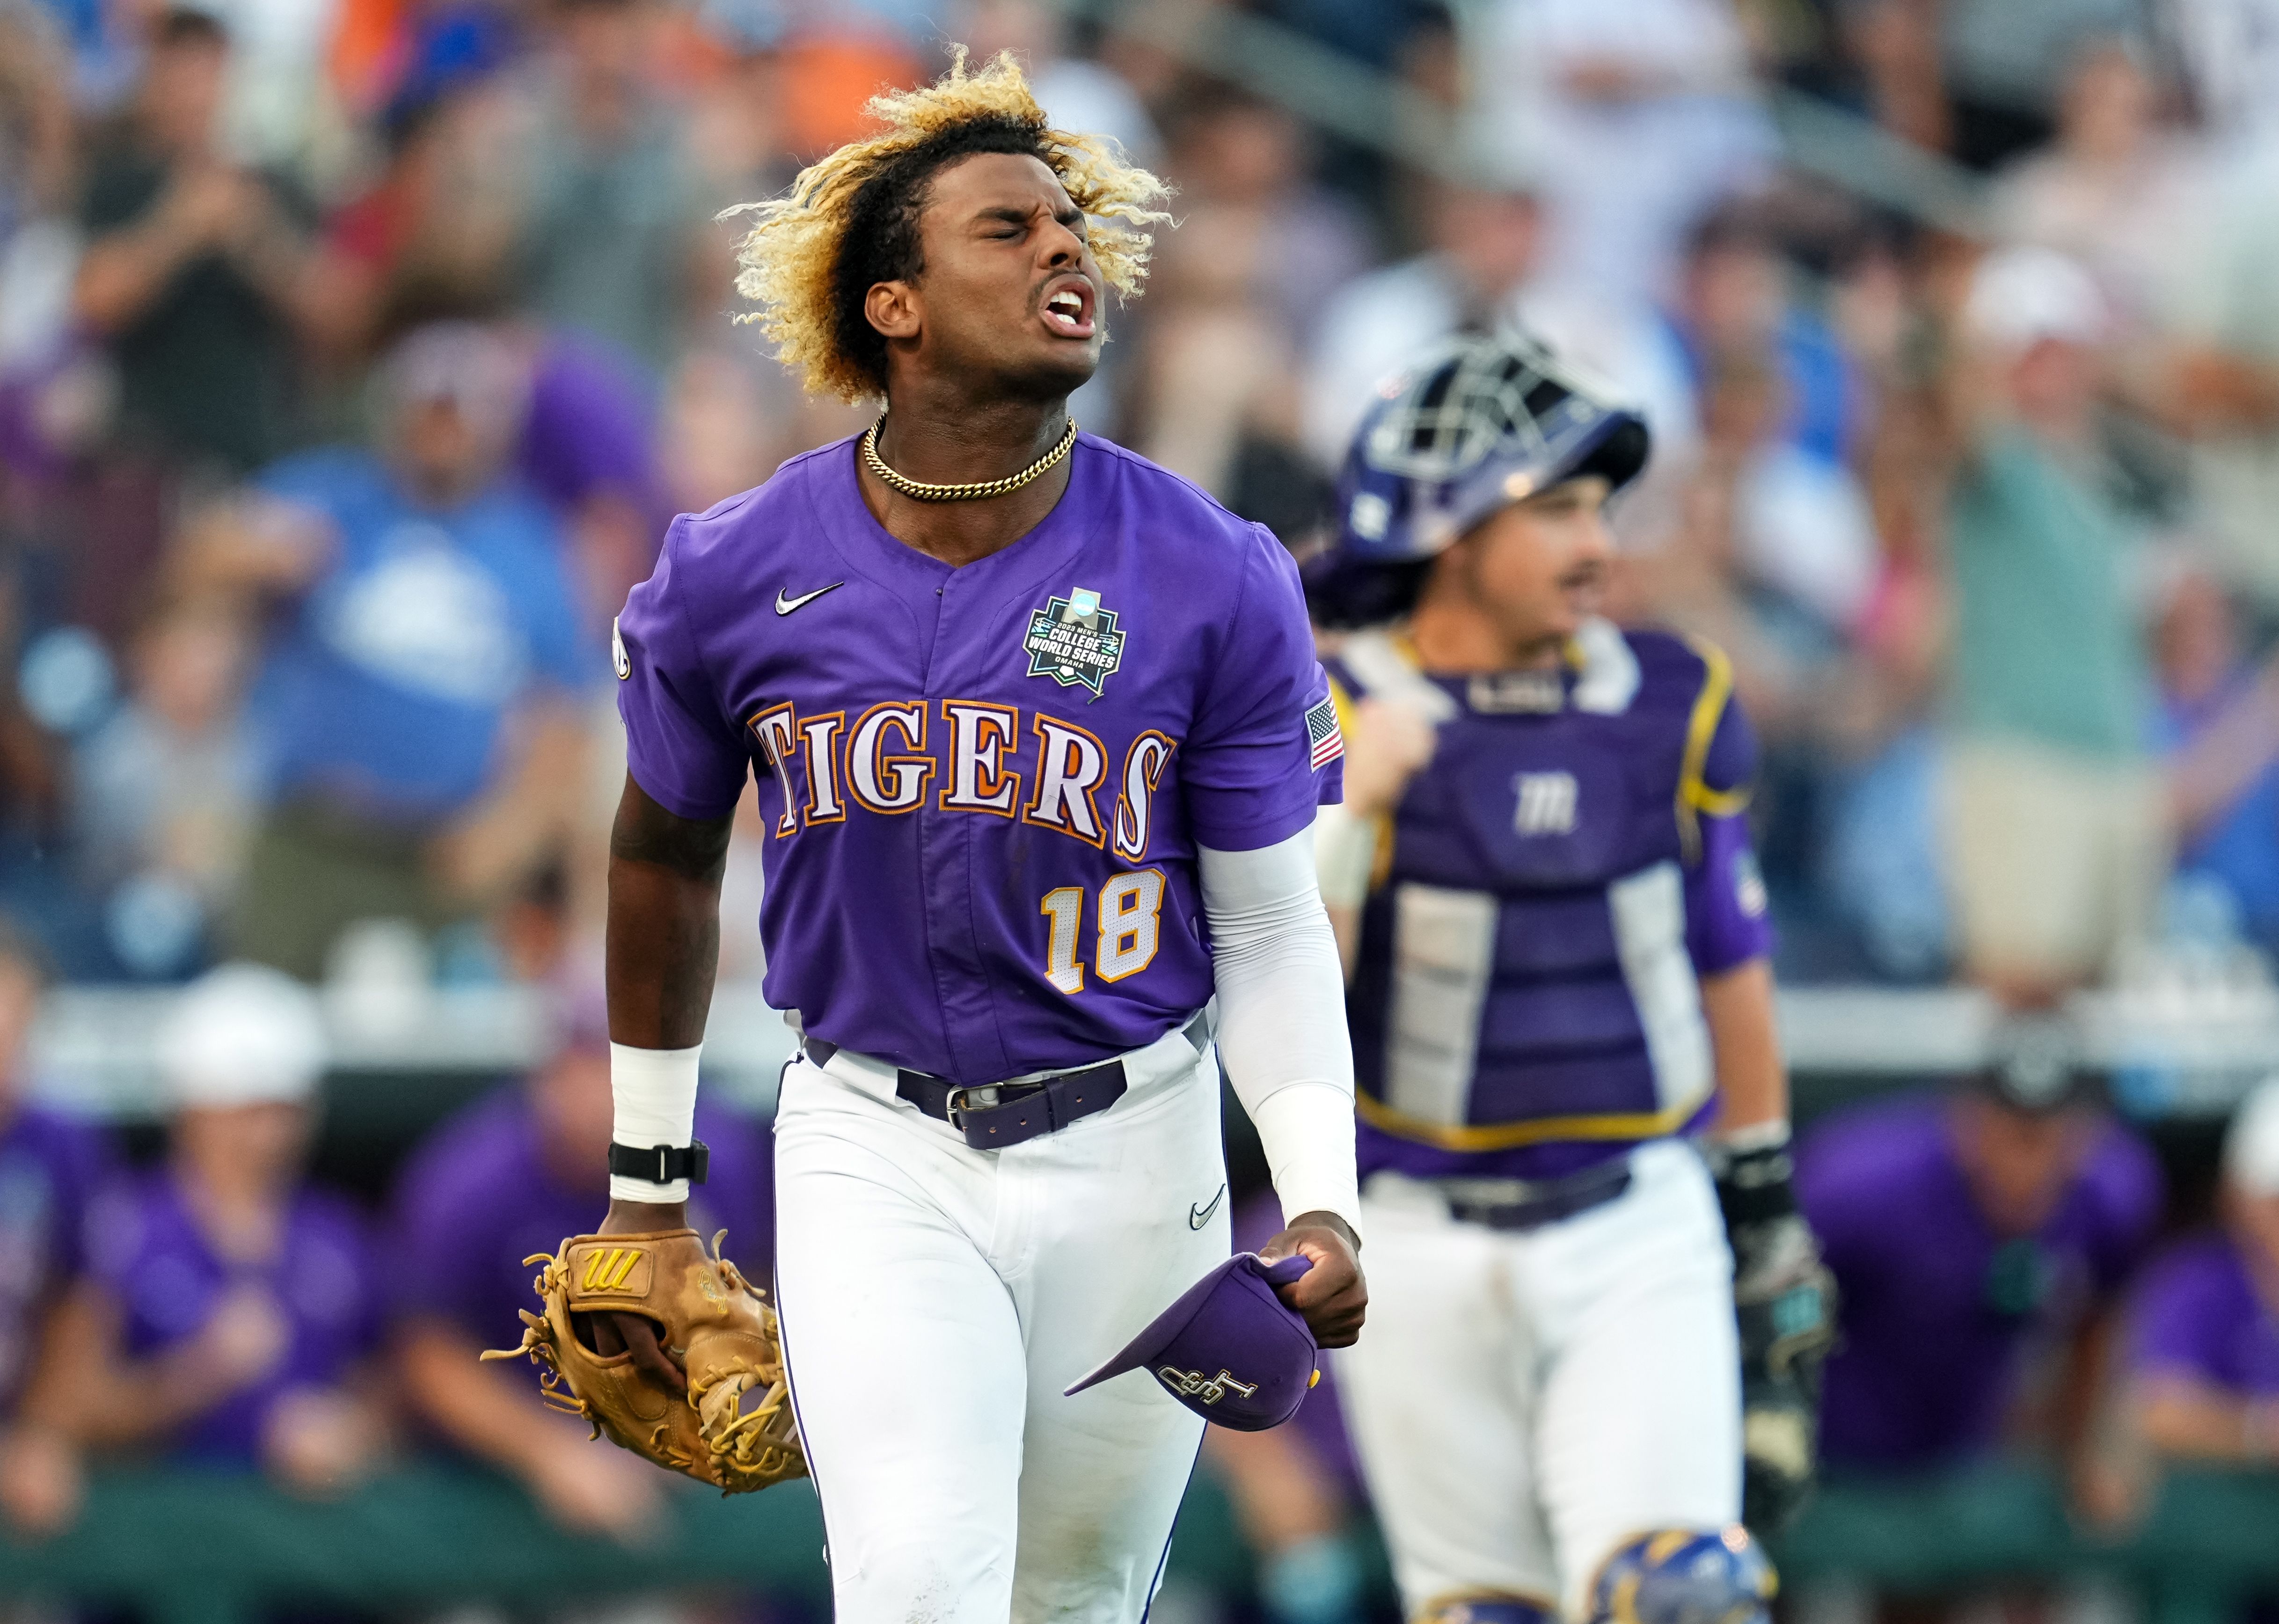 Louisiana State baseball player Tre Morgan, wearing a purple jersey, celebrates a good play in the college World Series